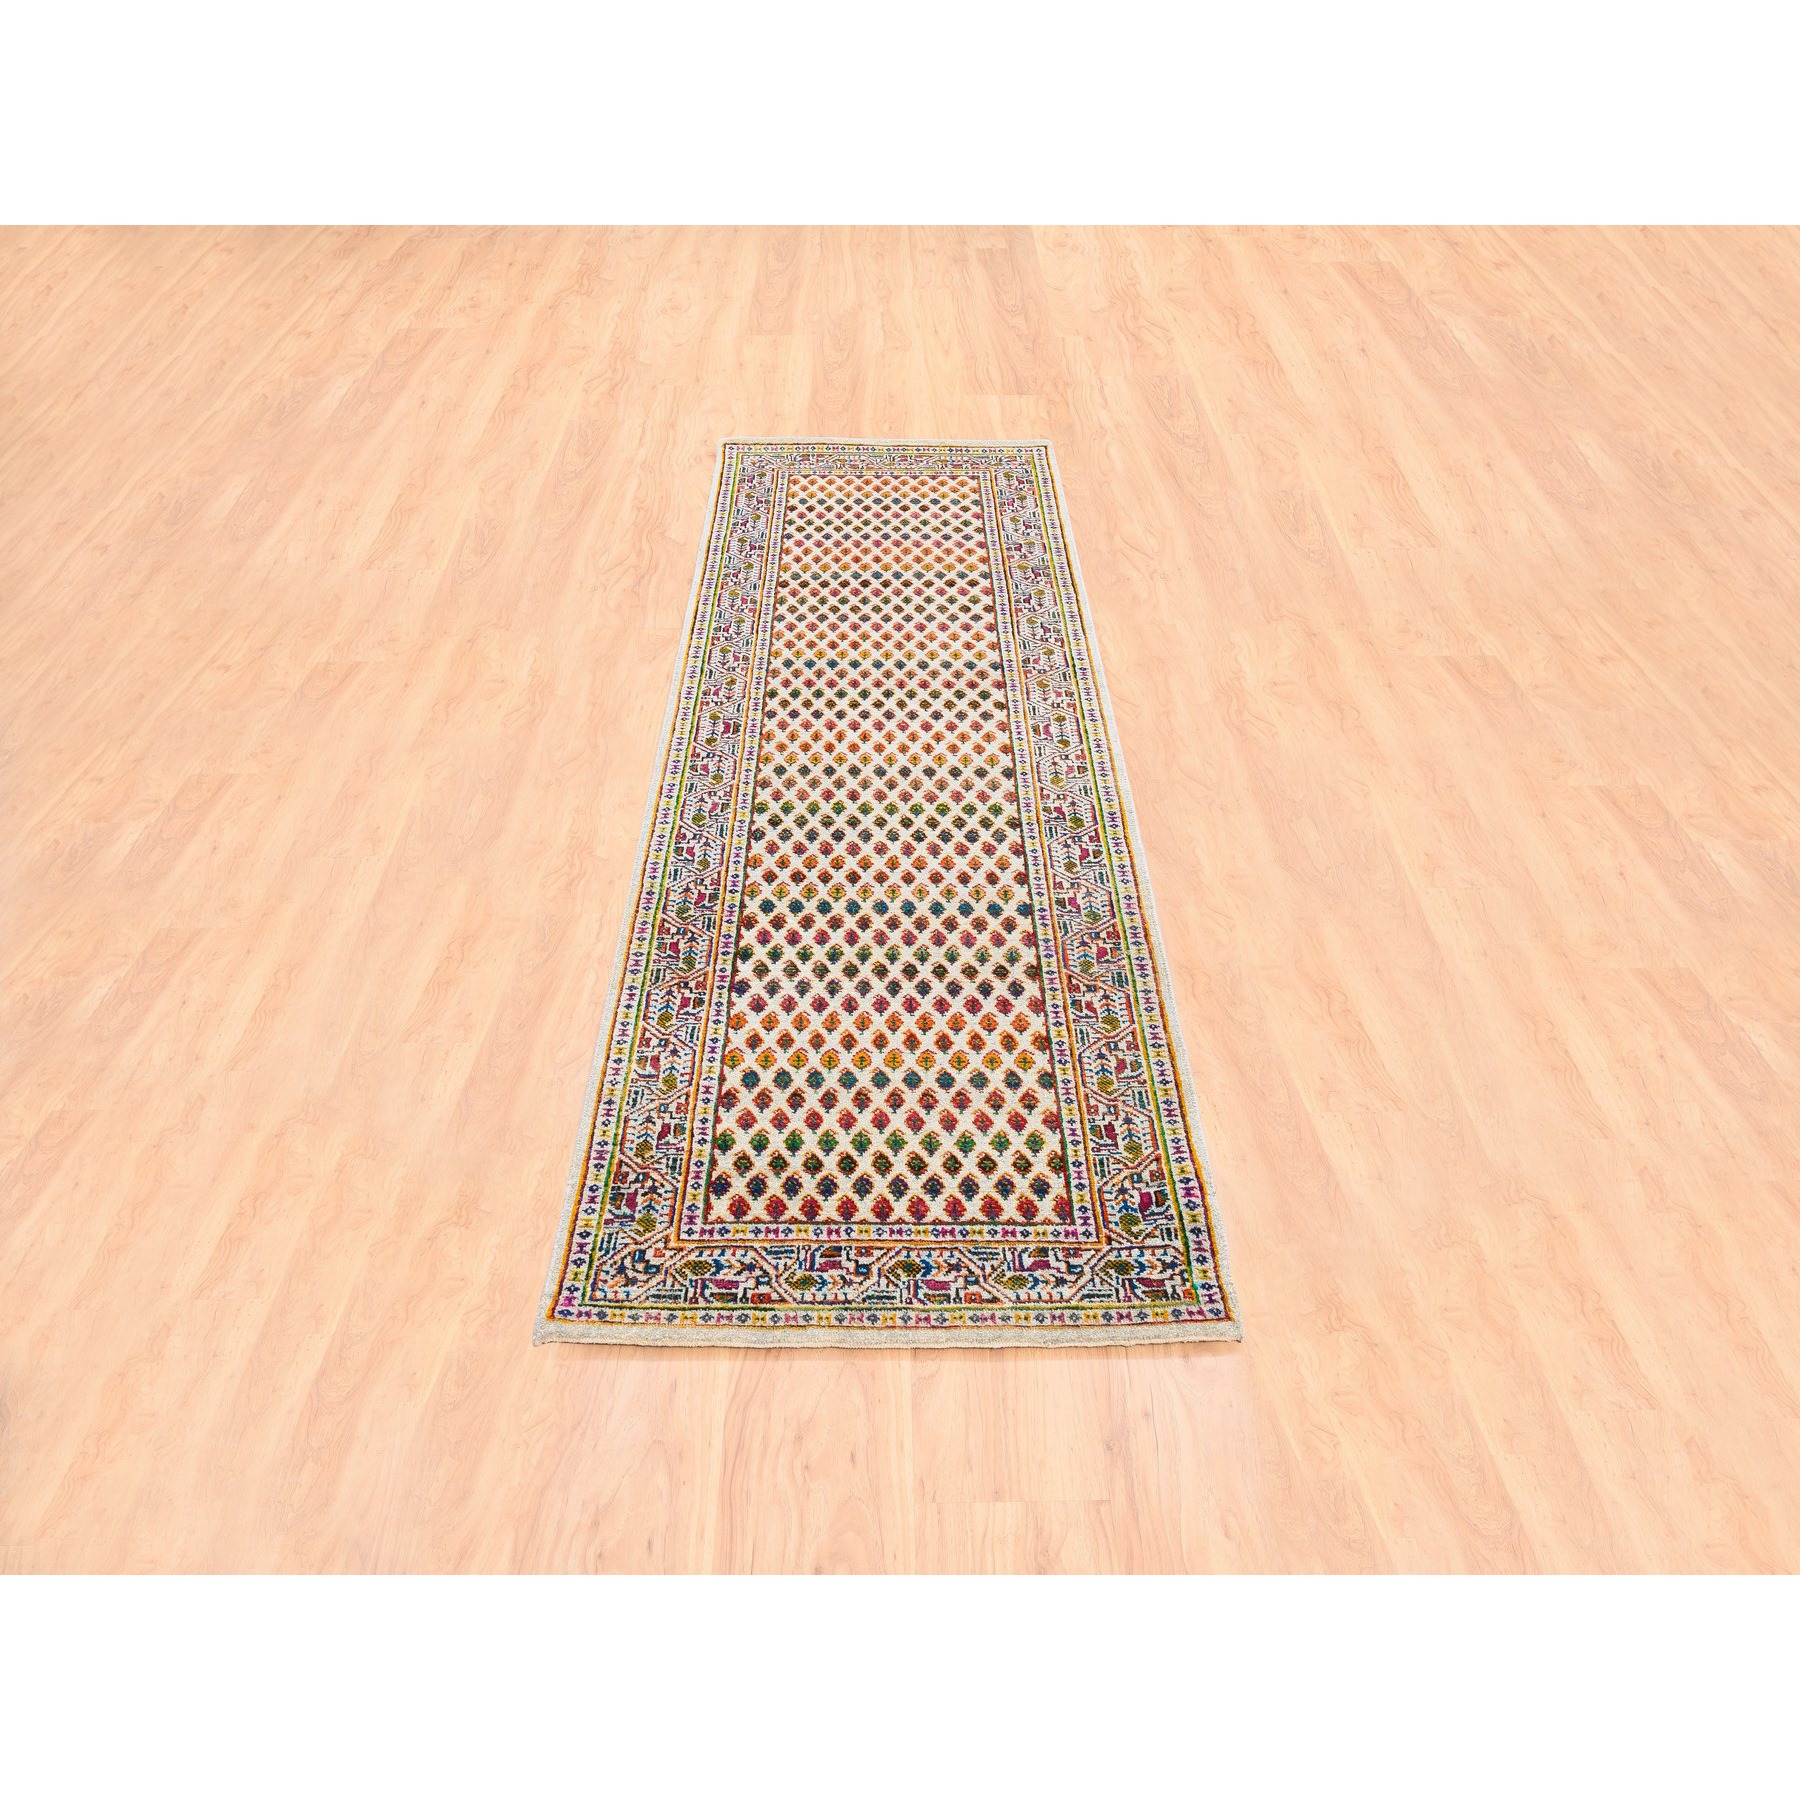 2'7"x8'1" Colorful Wool And Sari Silk Sarouk Mir Inspired With Repetitive Boteh Design Hand Woven Oriental Runner Rug 